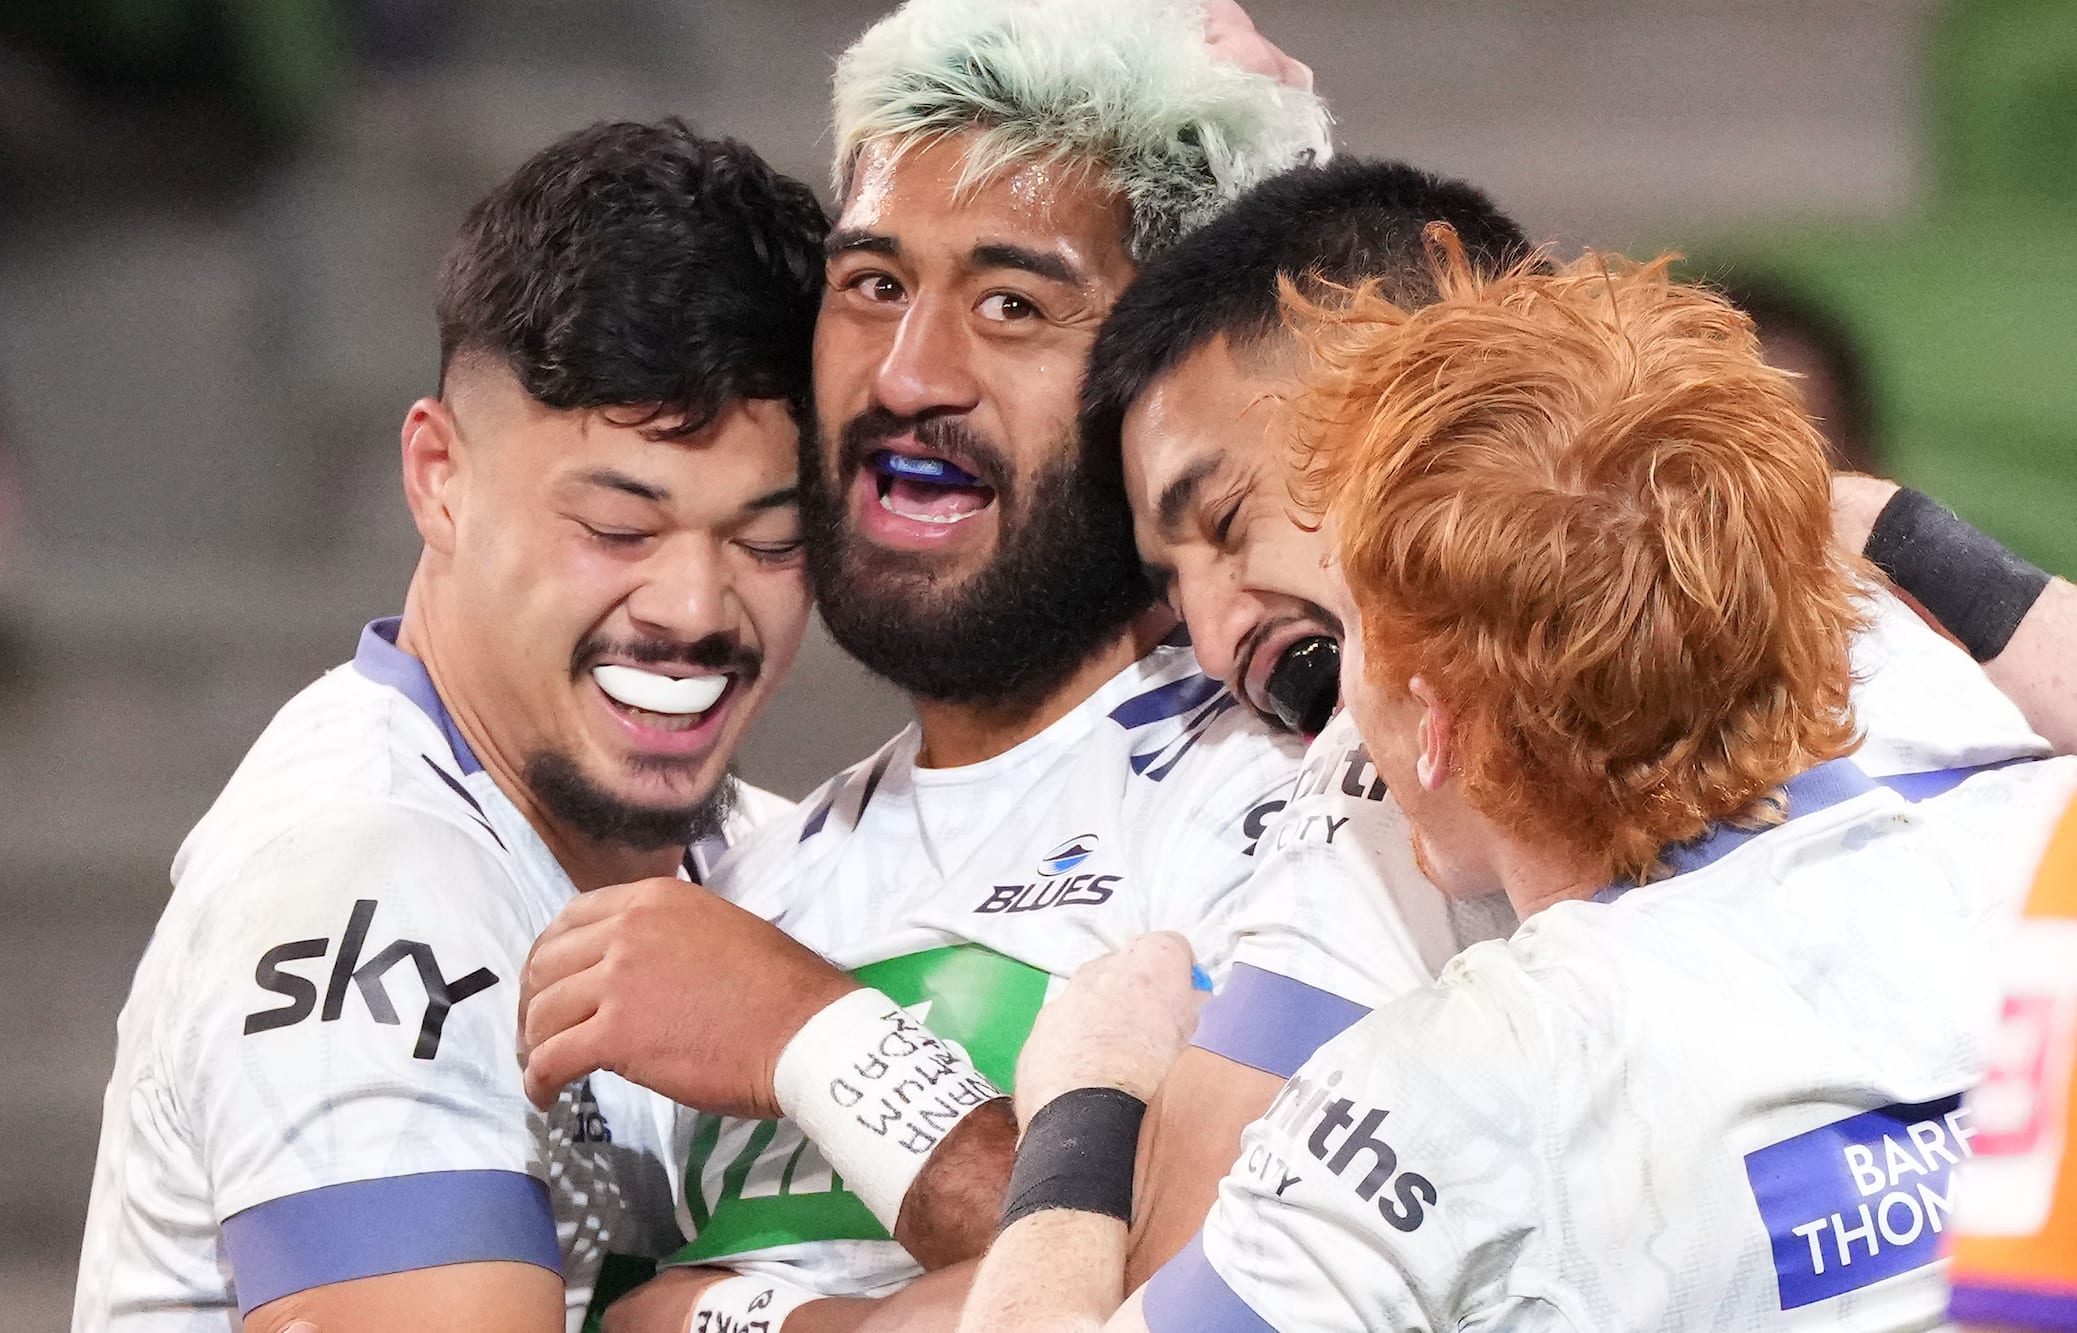 The Blues Akira Ioane, centre, after scoring a try in Round 1 of the Trans-Tasman Super Rugby against the Rebels at AAMI Park in Melbourne.